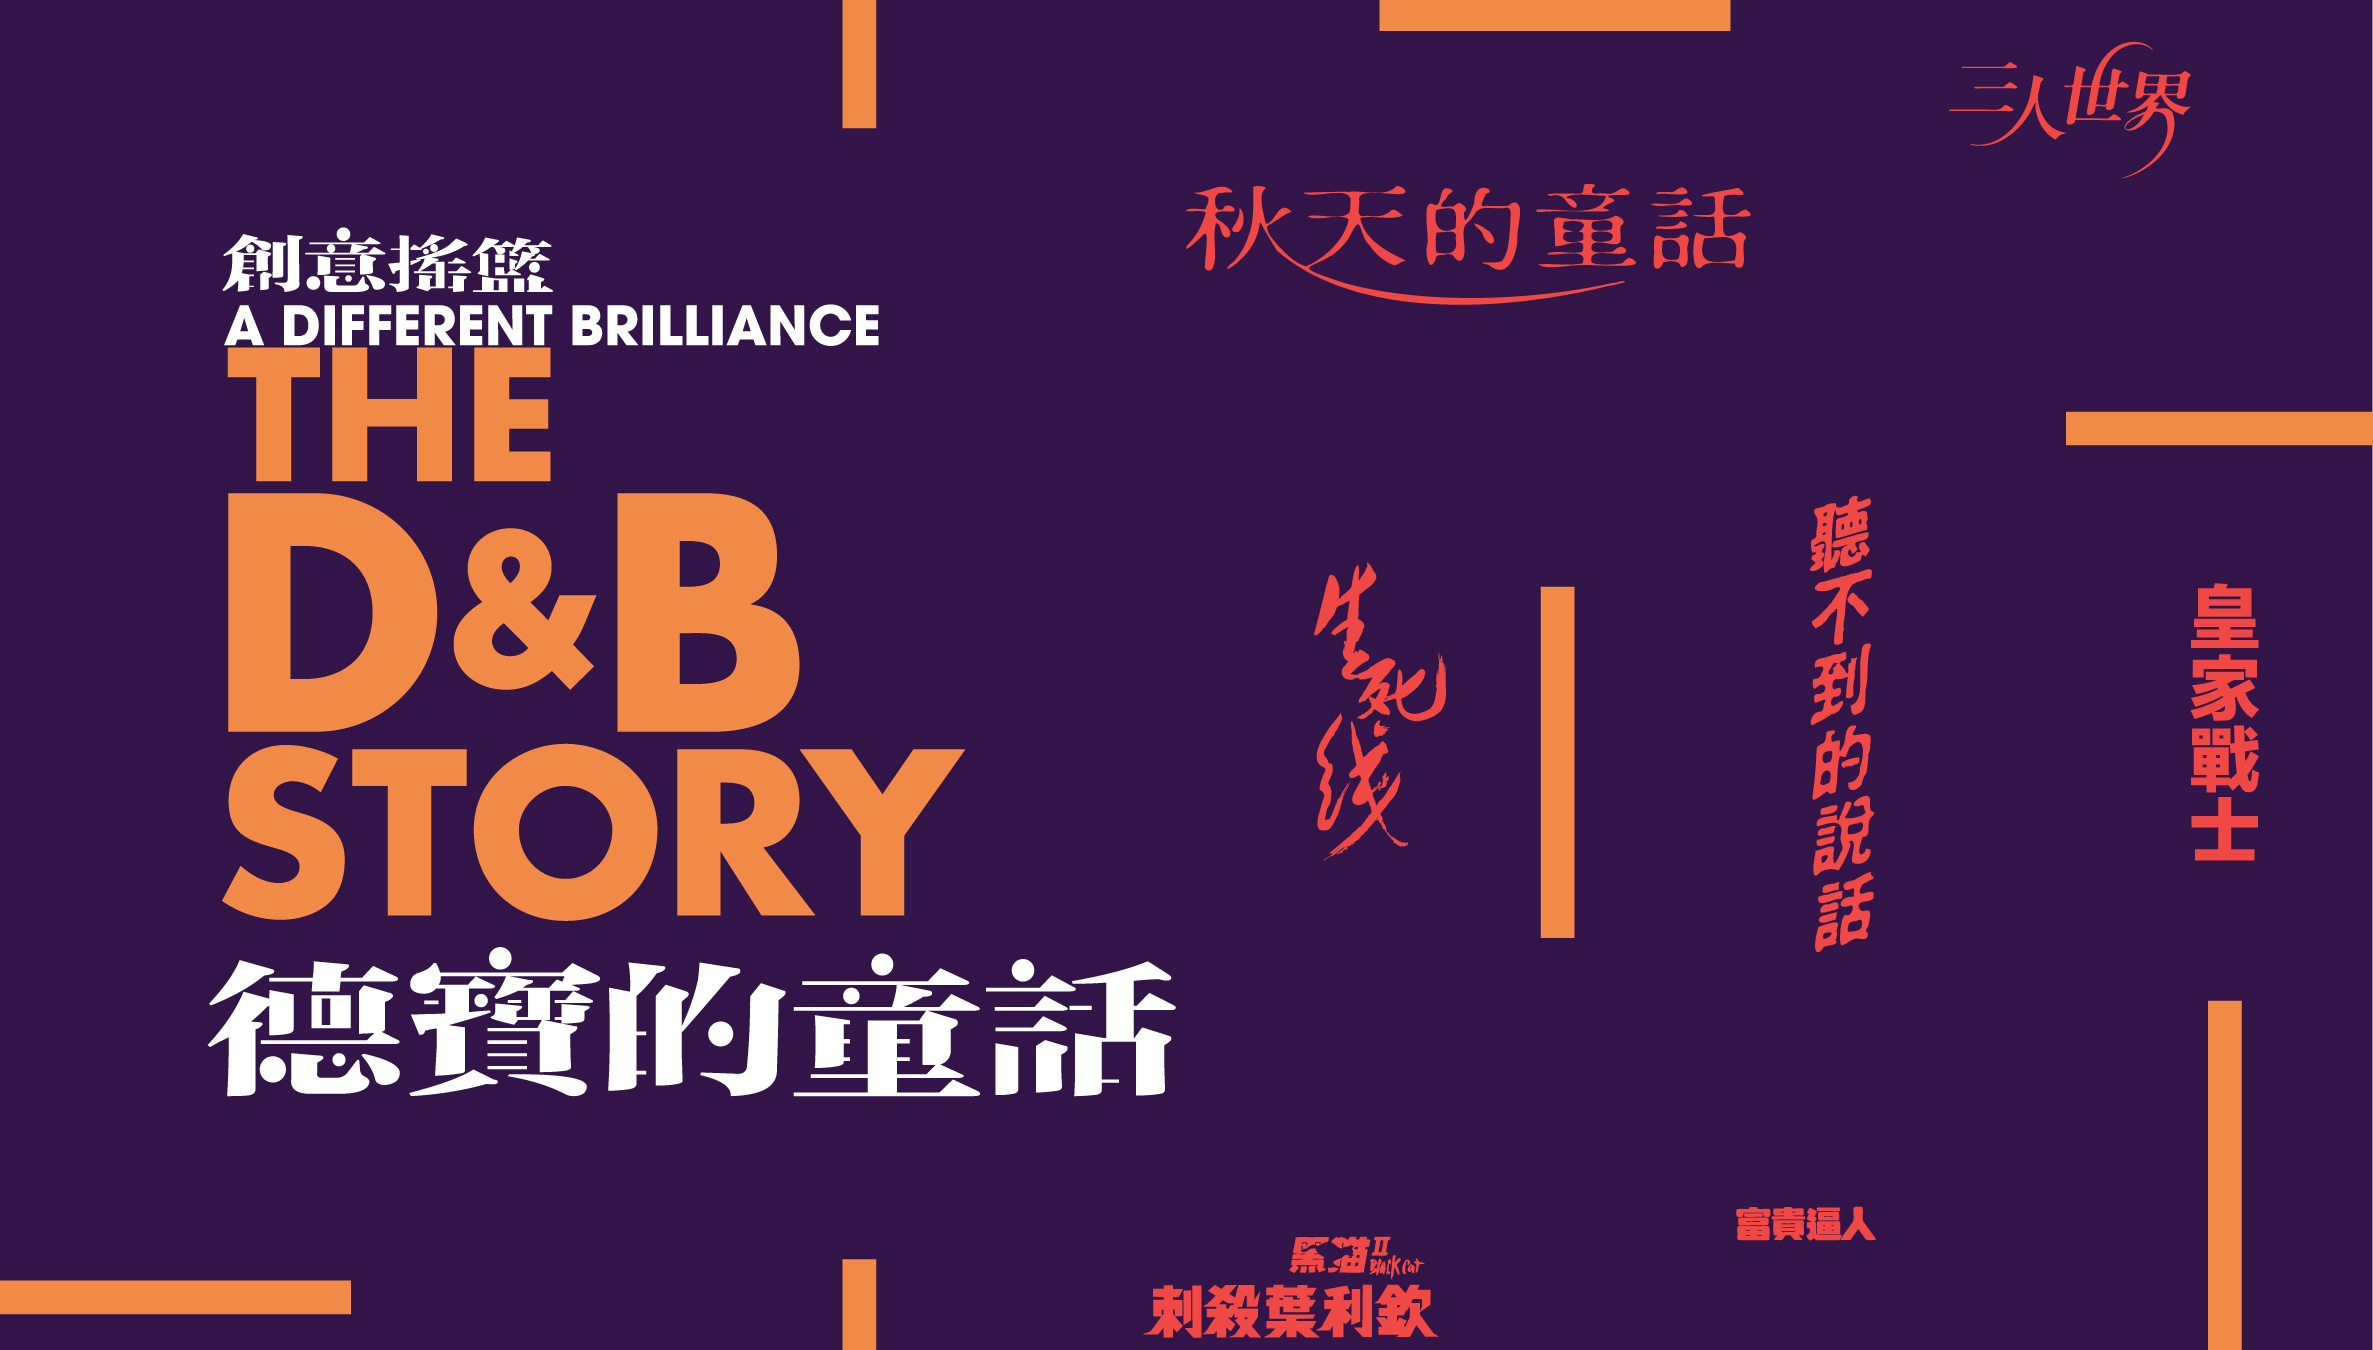 A Different Brilliance — The D & B Story [ Exhibition period extended to 21 February 2021 ]